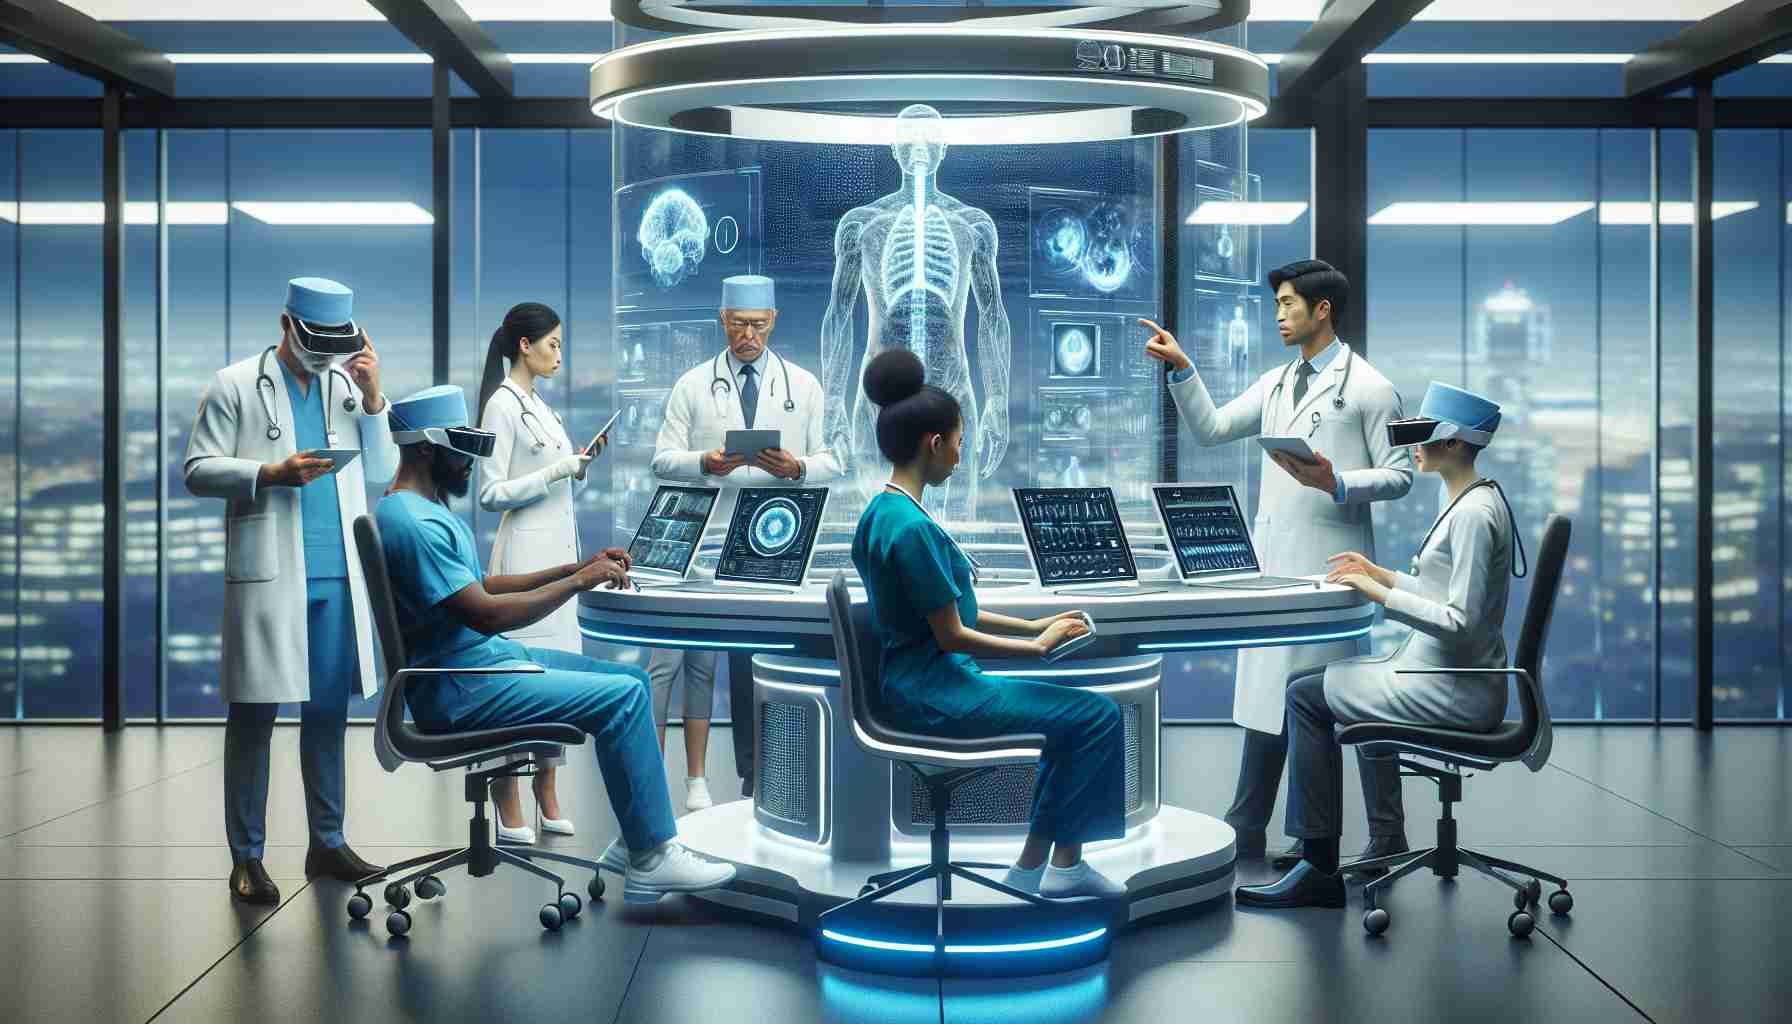 Generate a high-definition, realistic image showcasing the revolution of healthcare through advanced virtual technologies. The scene should represent a modern hospital environment with diverse healthcare professionals of various descents and genders utilizing futuristic tools. For instance, a South Asian female surgeon could be seen using a virtual reality headset to simulate a complex surgical procedure, while a Black male nurse is using a holographic display to monitor patient vitals. Further, a Caucasian male doctor could be seen interacting with AI-powered diagnostic software displayed on a large transparent touchscreen.